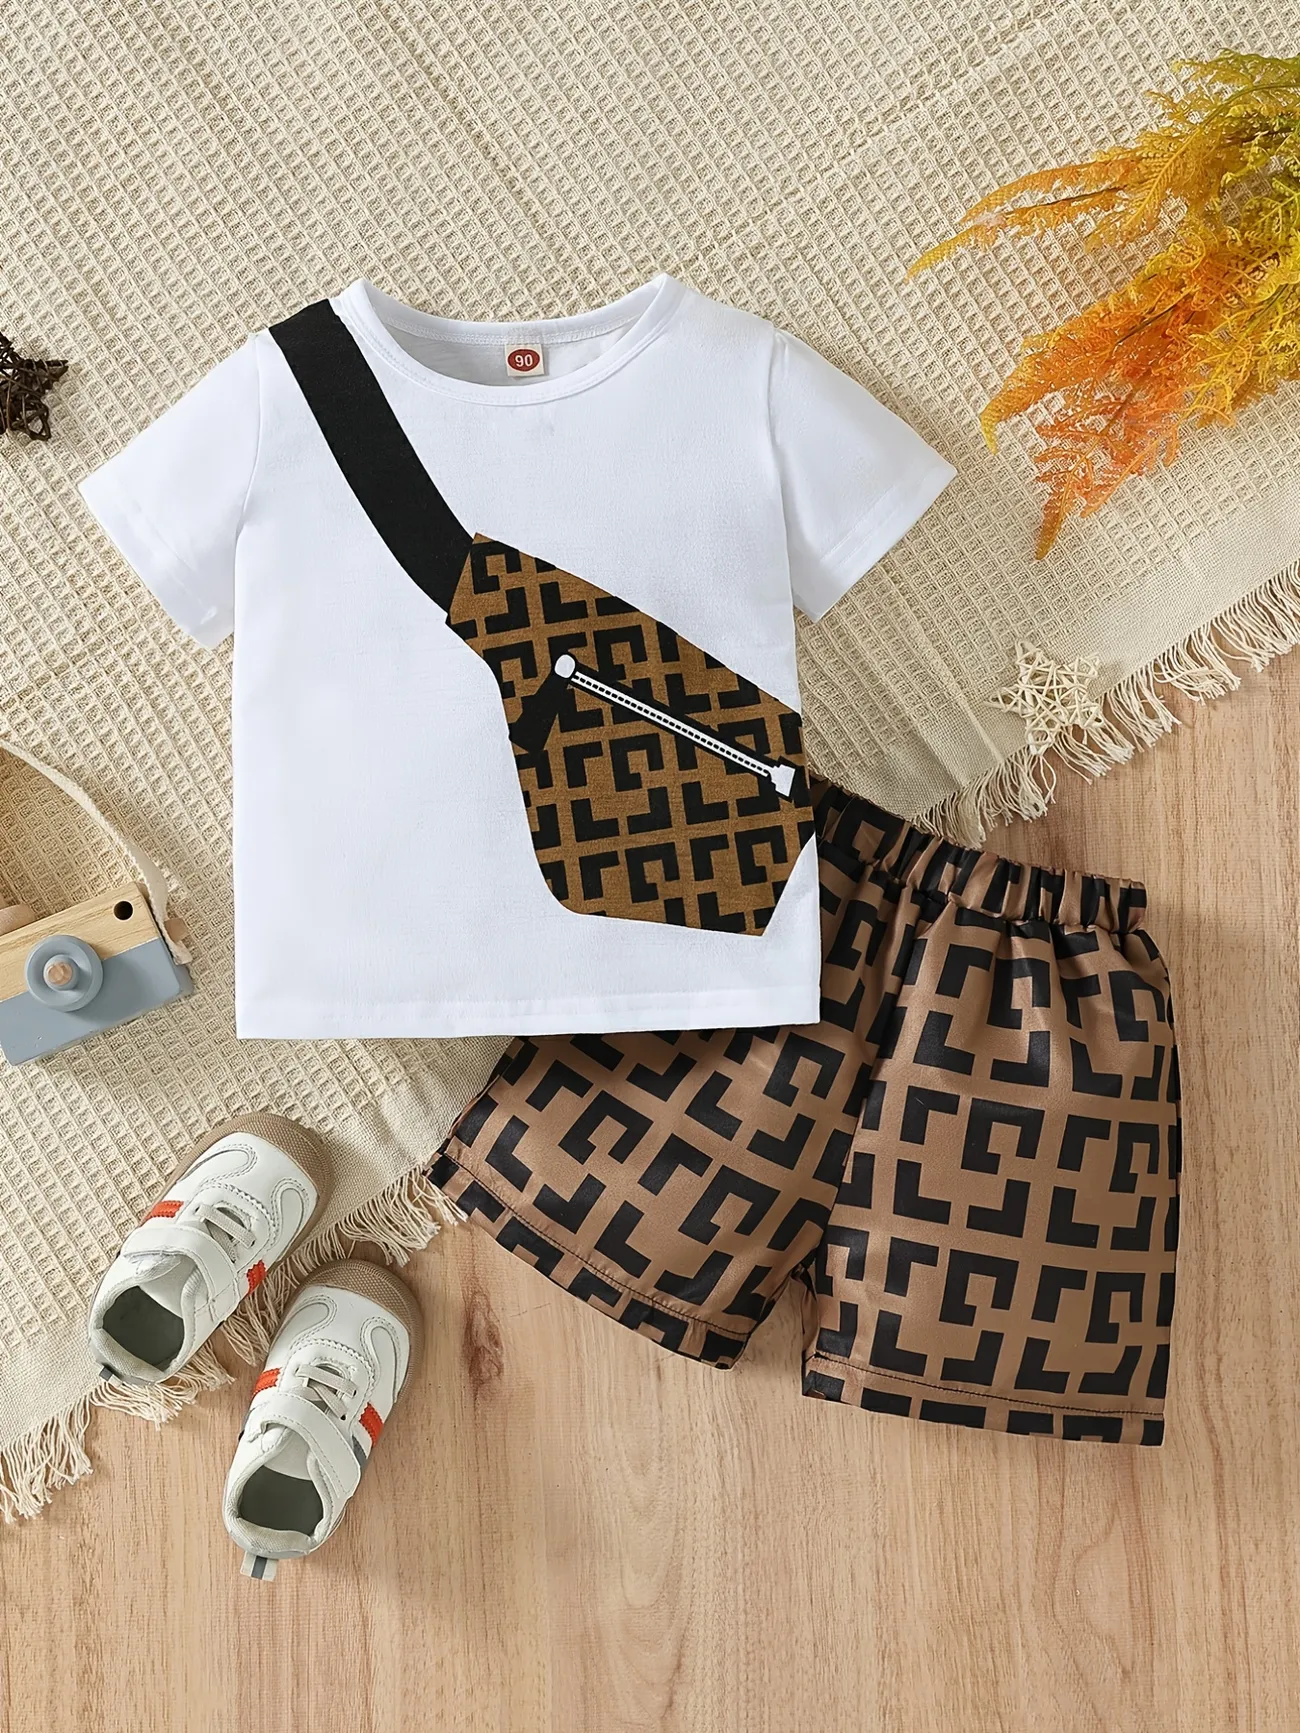 Boys Casual T Shirt With Crossbody Bag Print Shorts Set For Summer, Don't  Miss These Great Deals